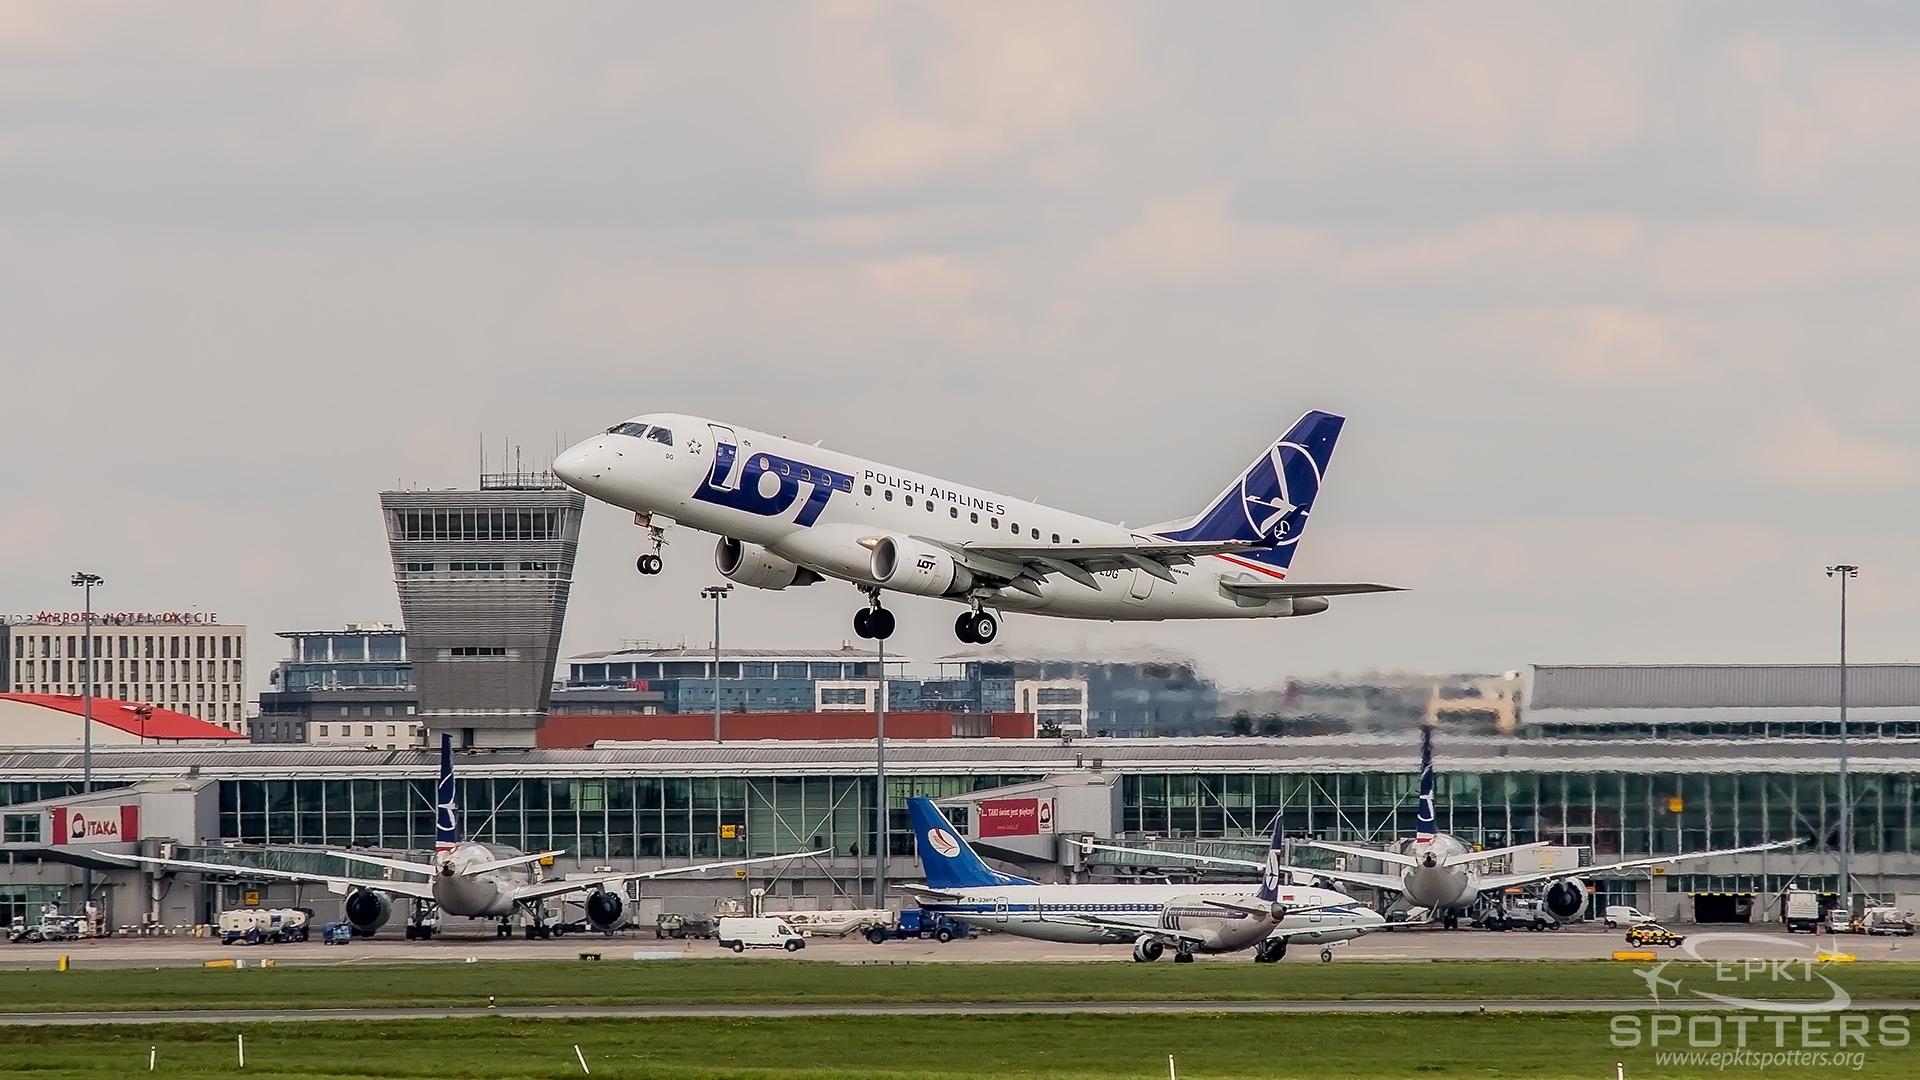 SP-LDG - Embraer 170 -100ST (LOT Polish Airlines) / Chopin / Okecie - Warsaw Poland [EPWA/WAW]